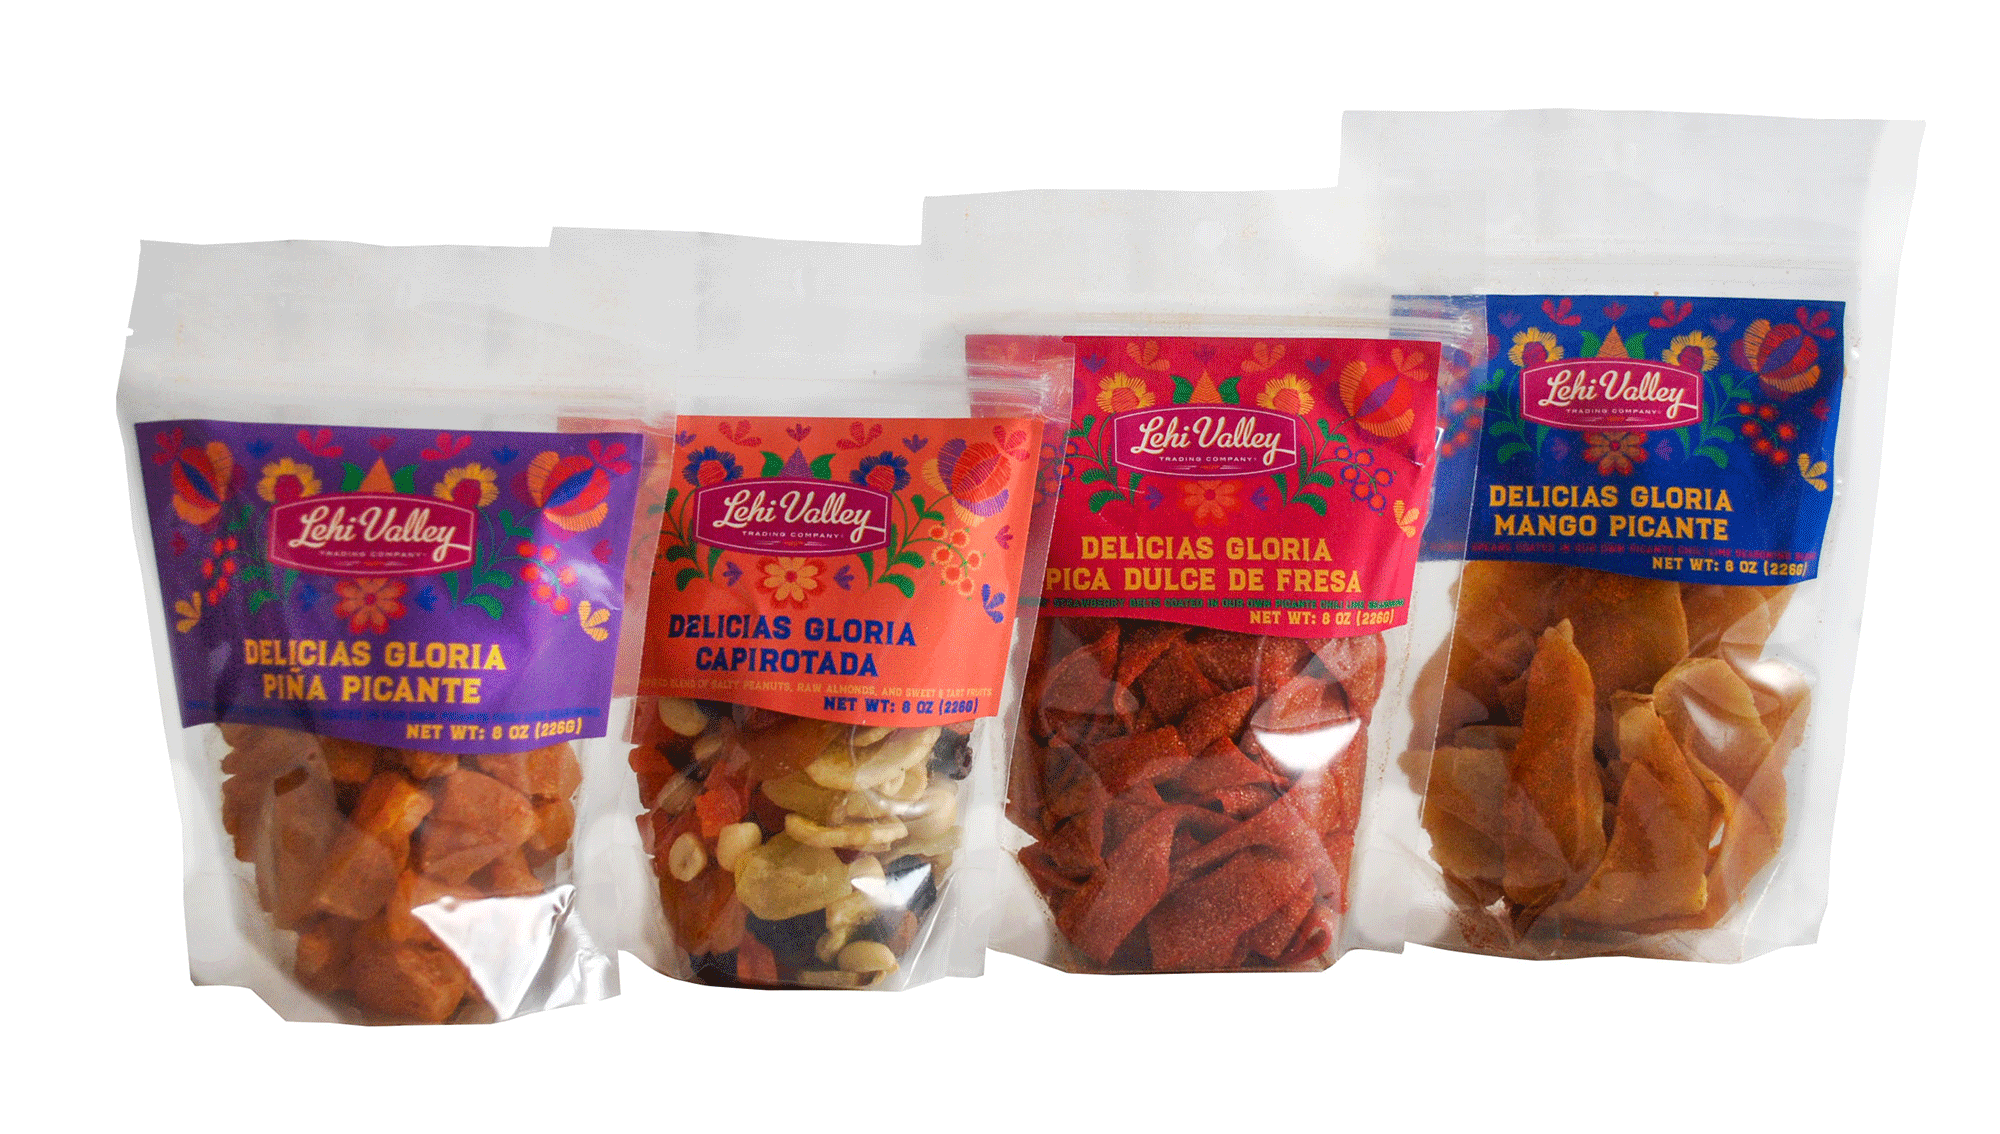 Our Delicias Gloria flavors displayed in their bags